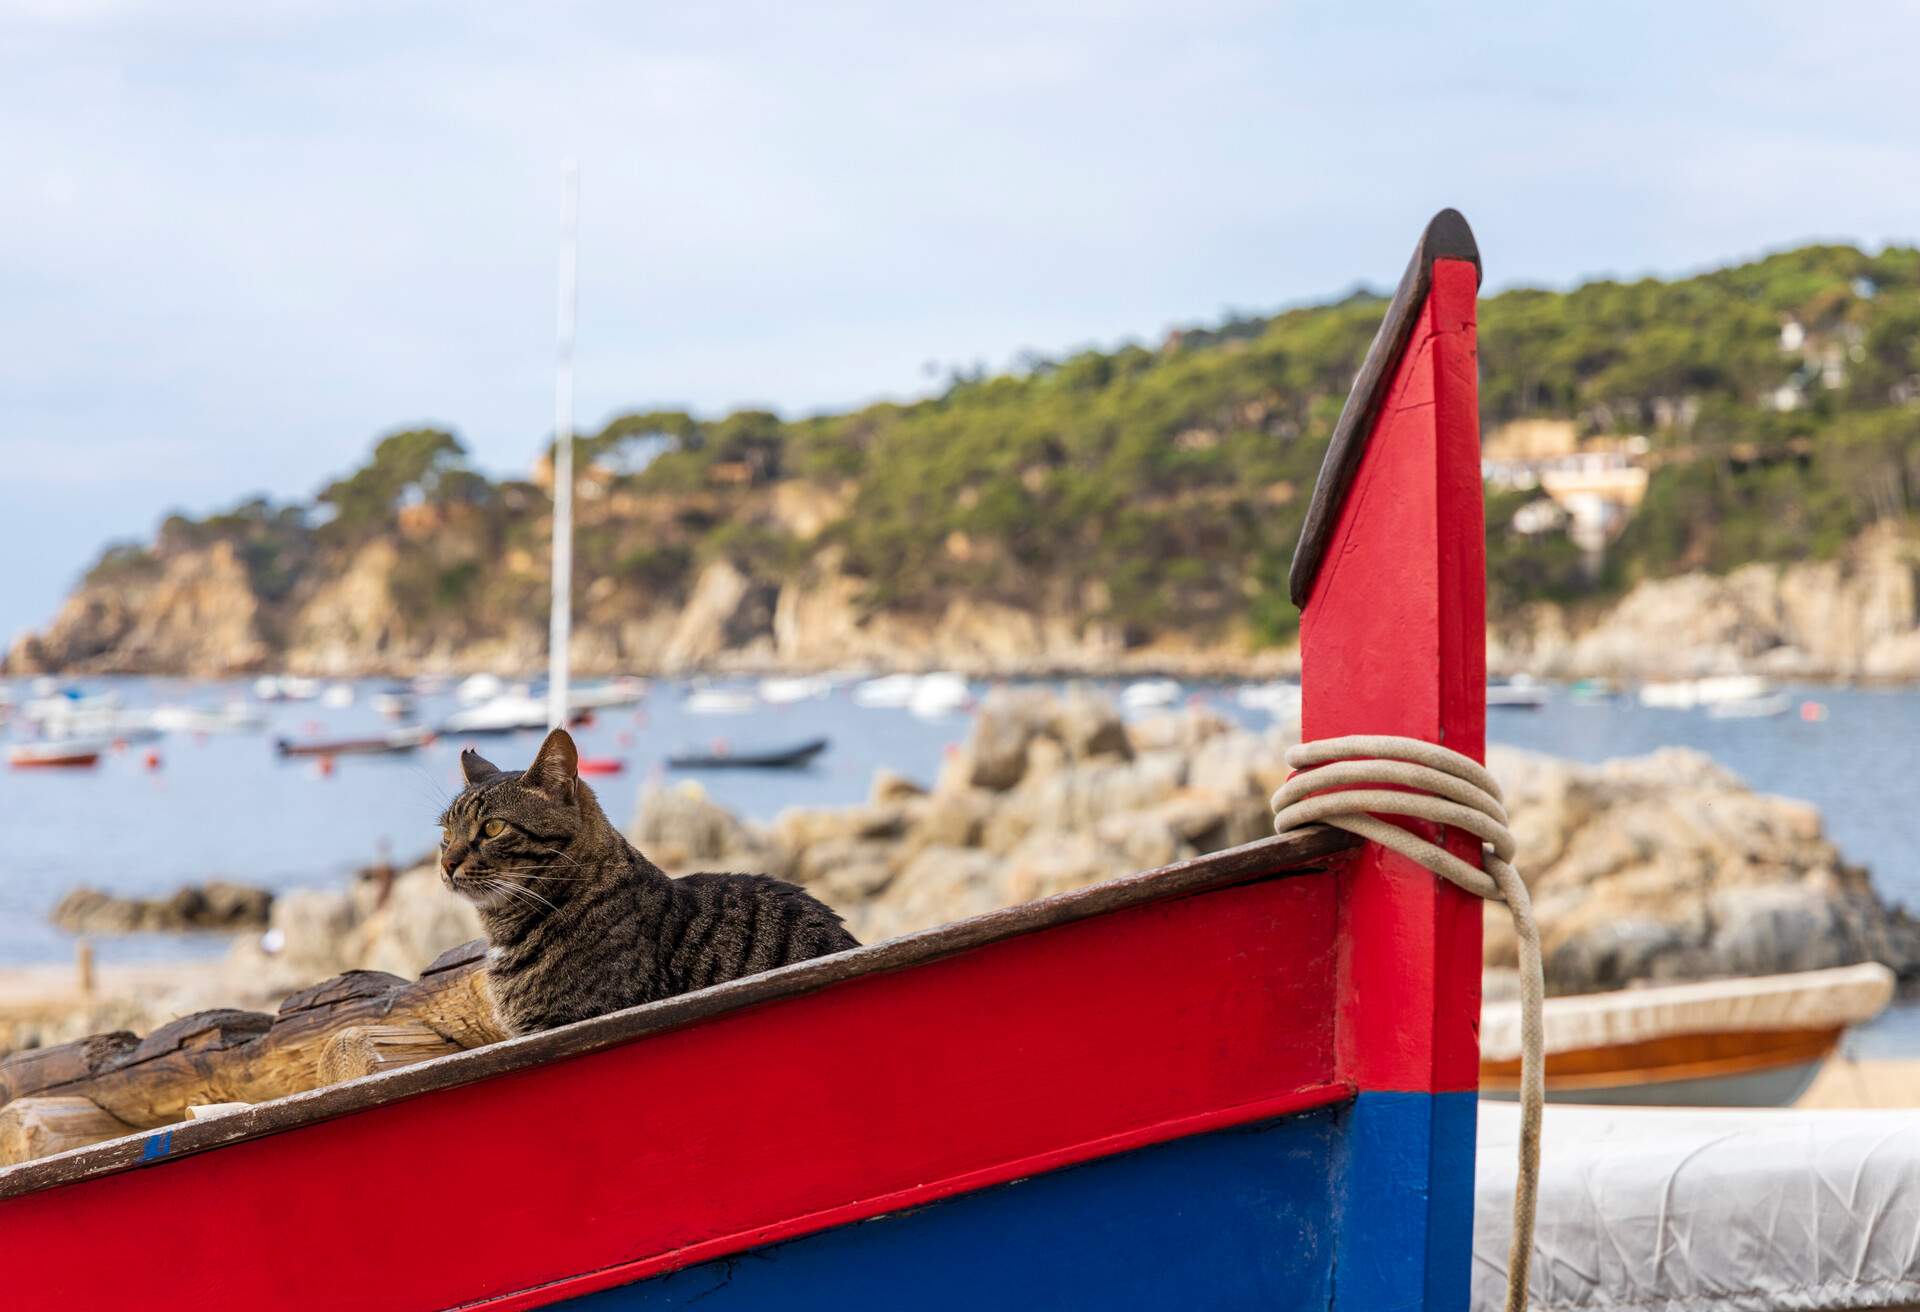 Two brown cats with stripes, on top of a boat moored on the Mediterranean beach